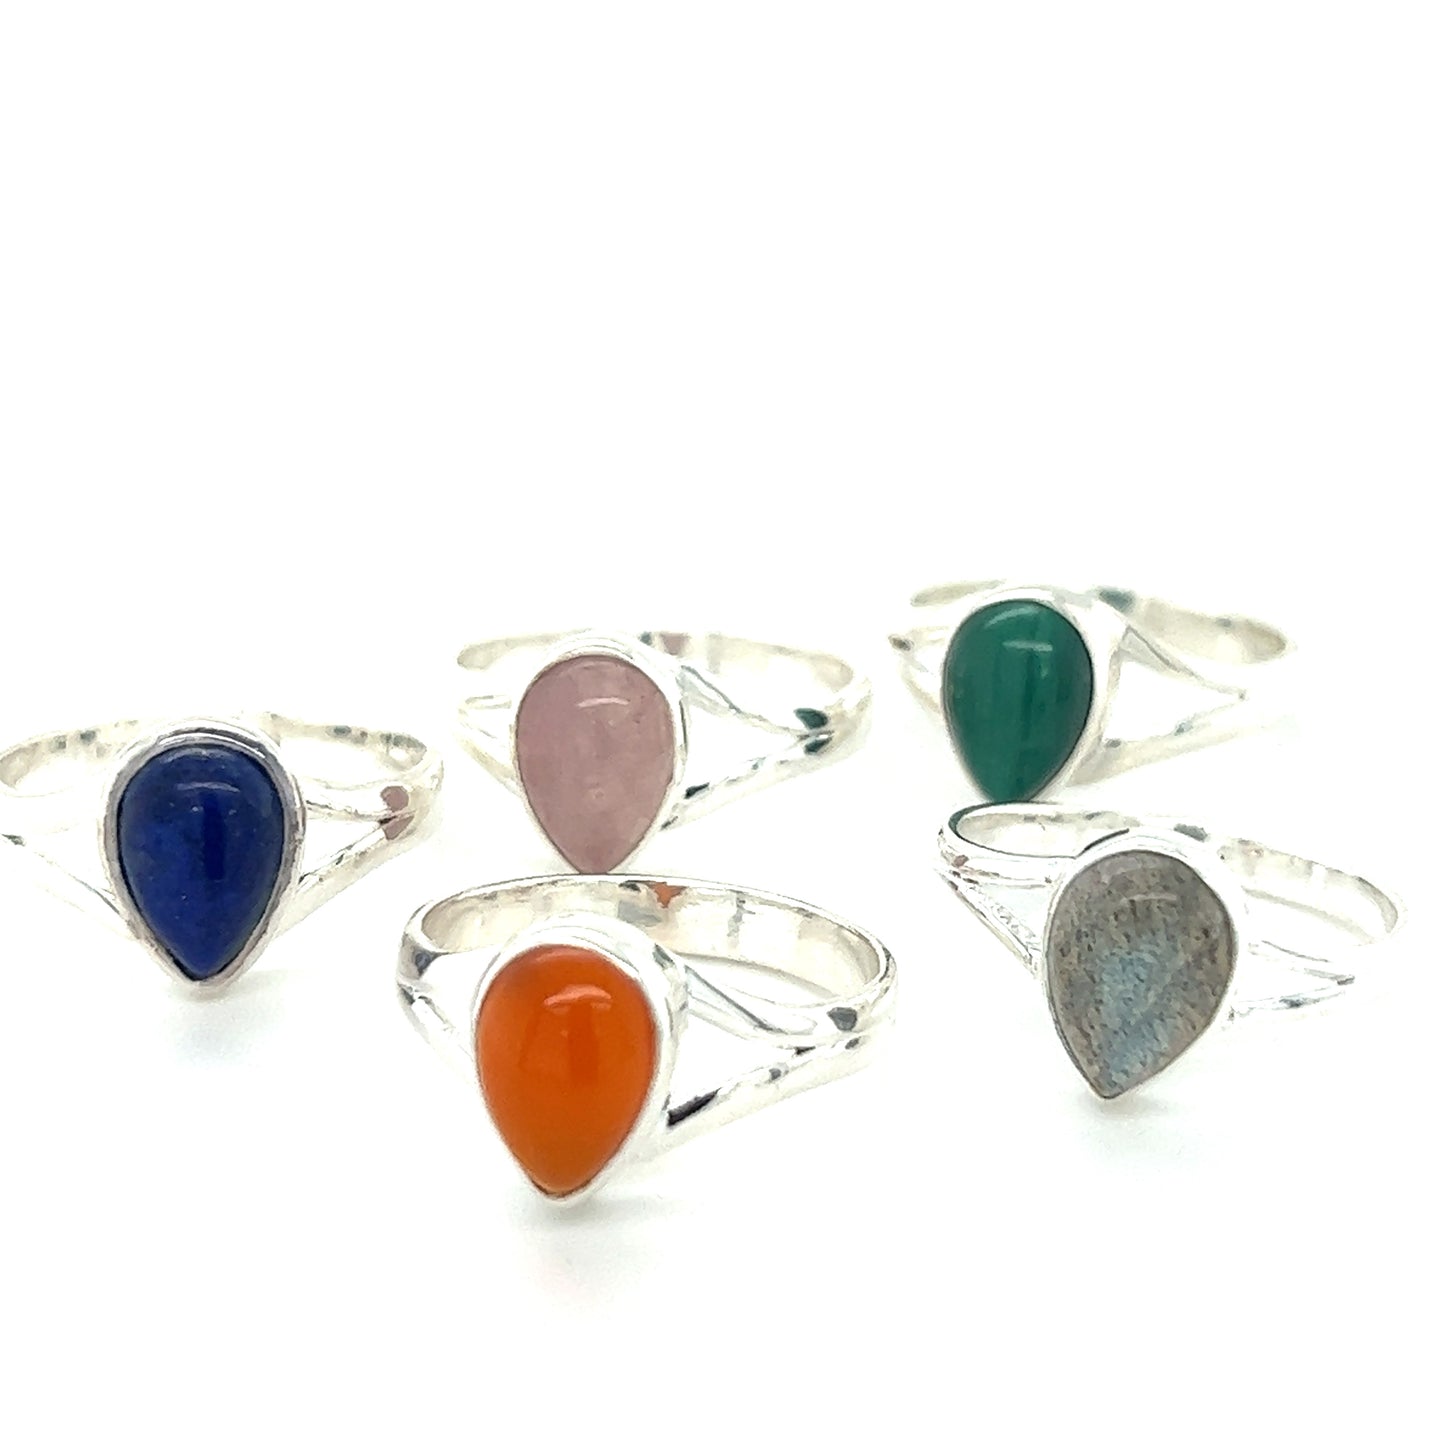 A modern set of Simple Teardrop Shape Gemstone rings with cabochon stones.